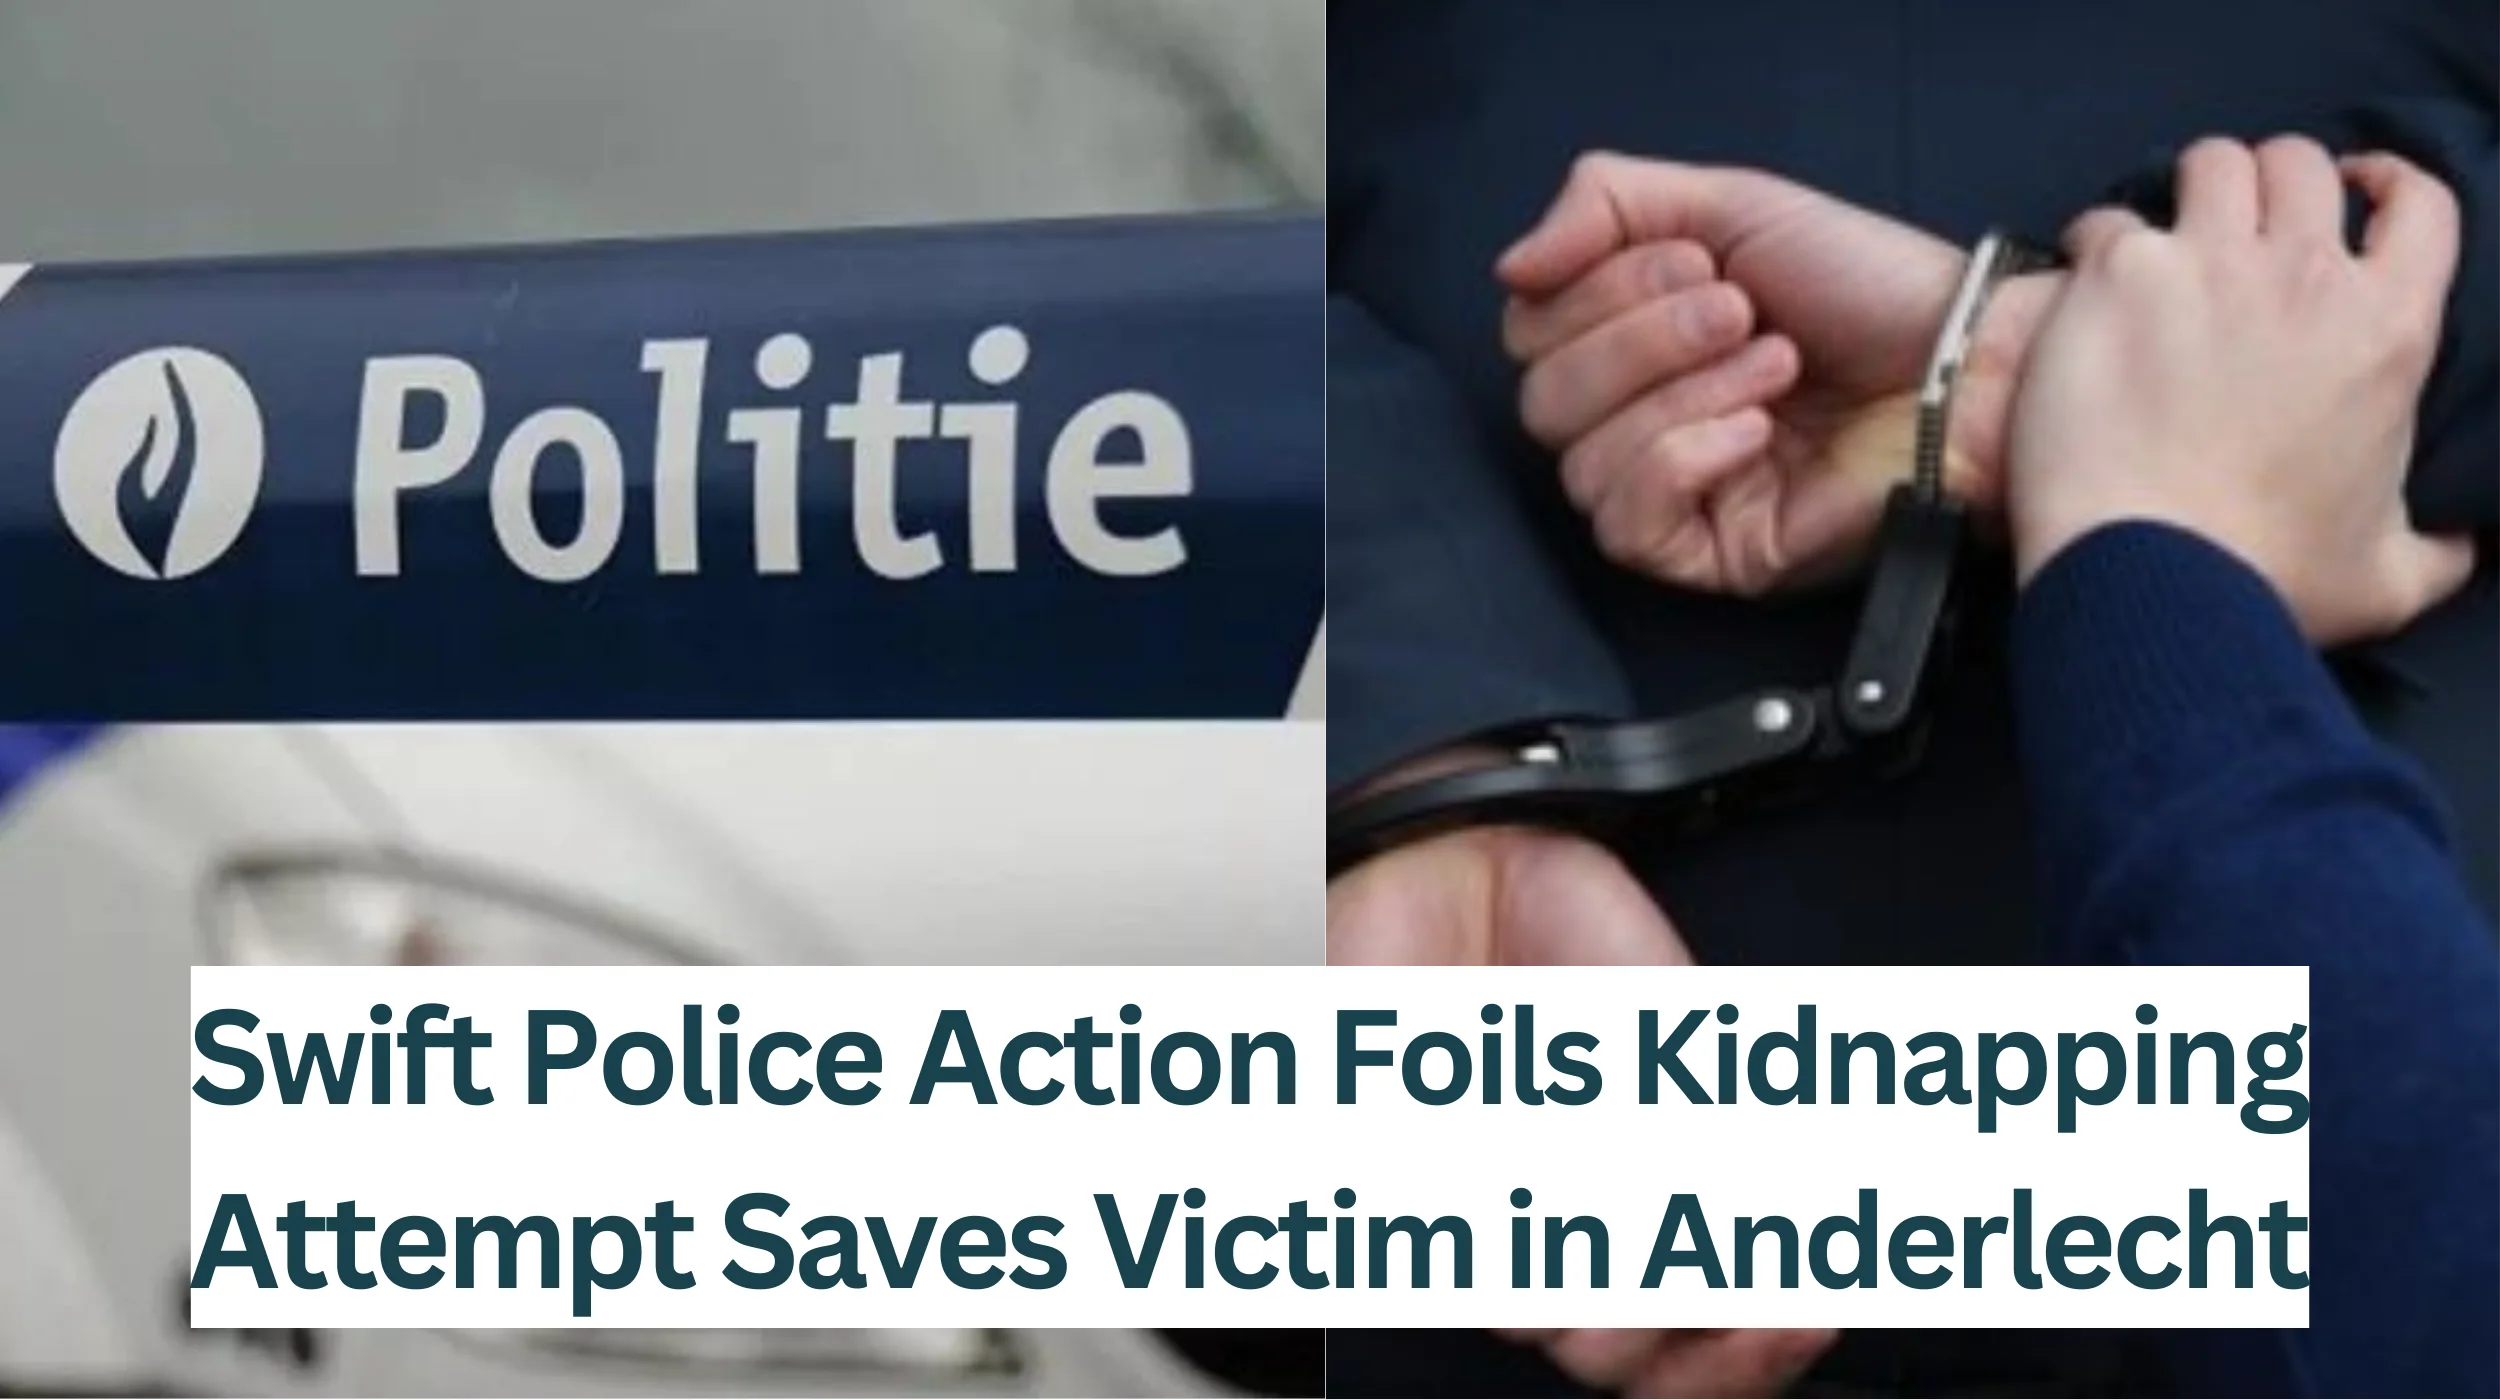 Swift-Police-Action-Foils-Kidnapping-Attempt-Saves-Victim-in-Anderlecht